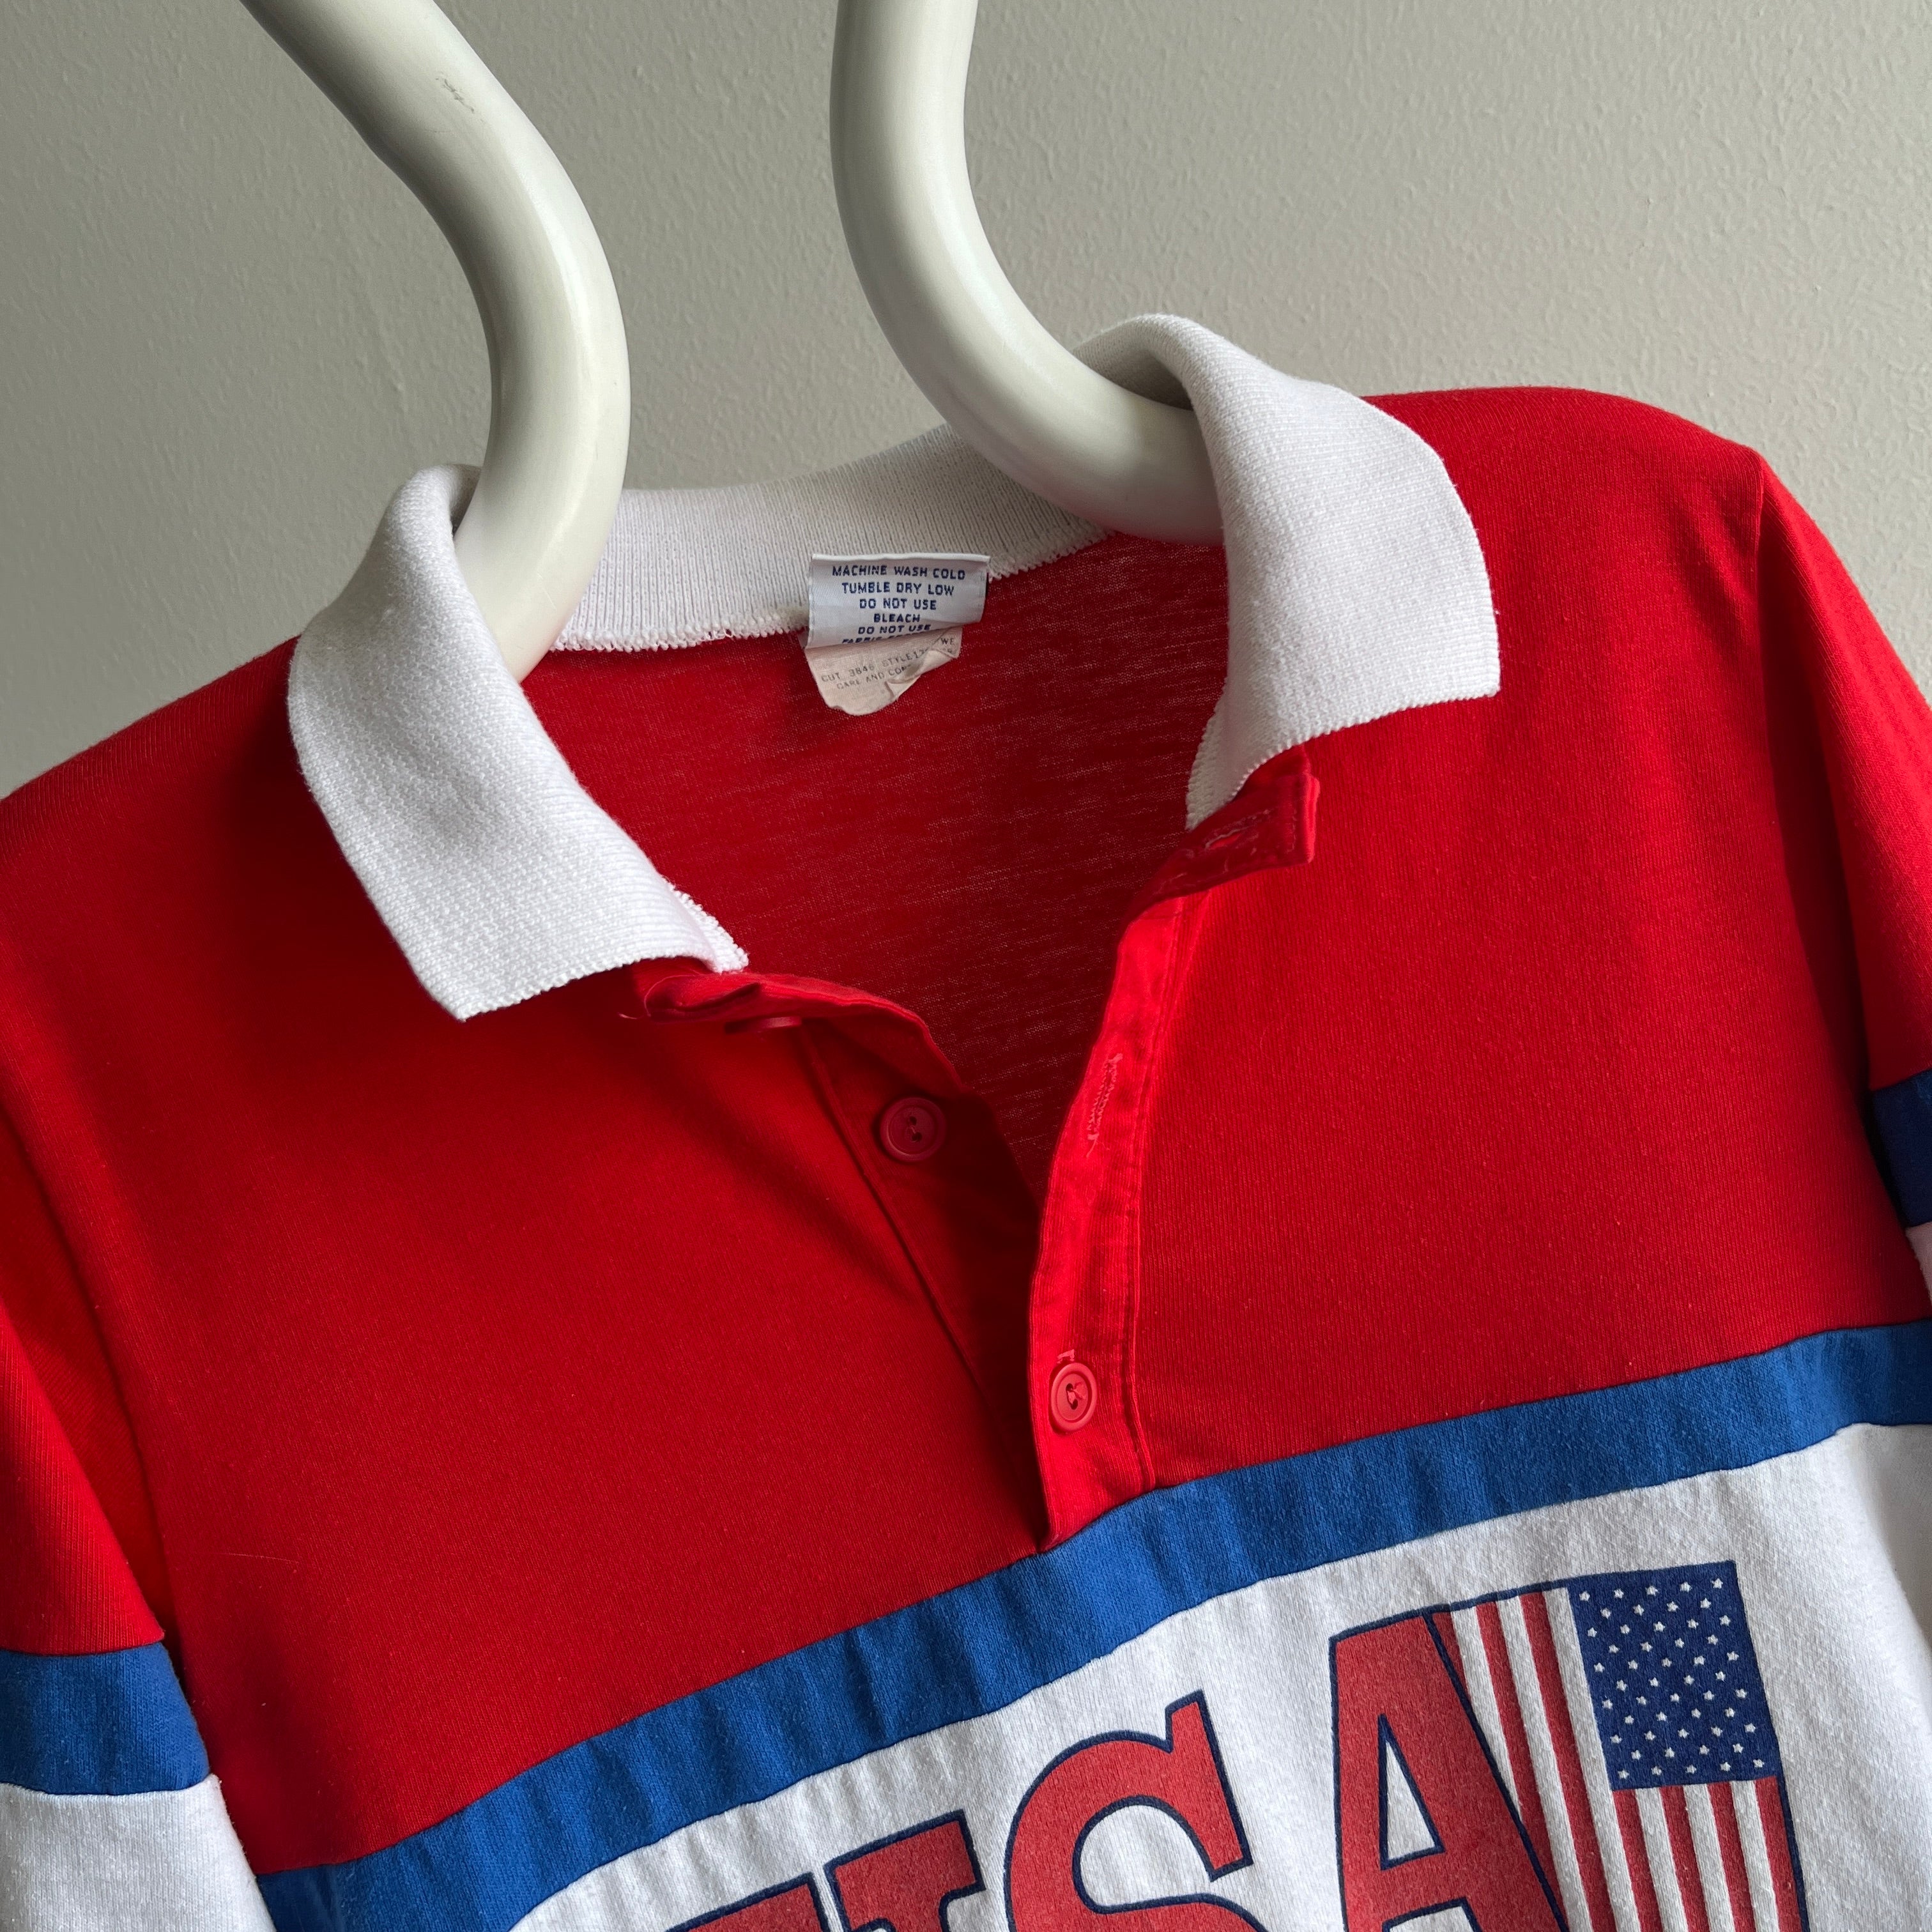 1980/90s USA Rugby T-Shirt by Nutmeg (Lighter weight)